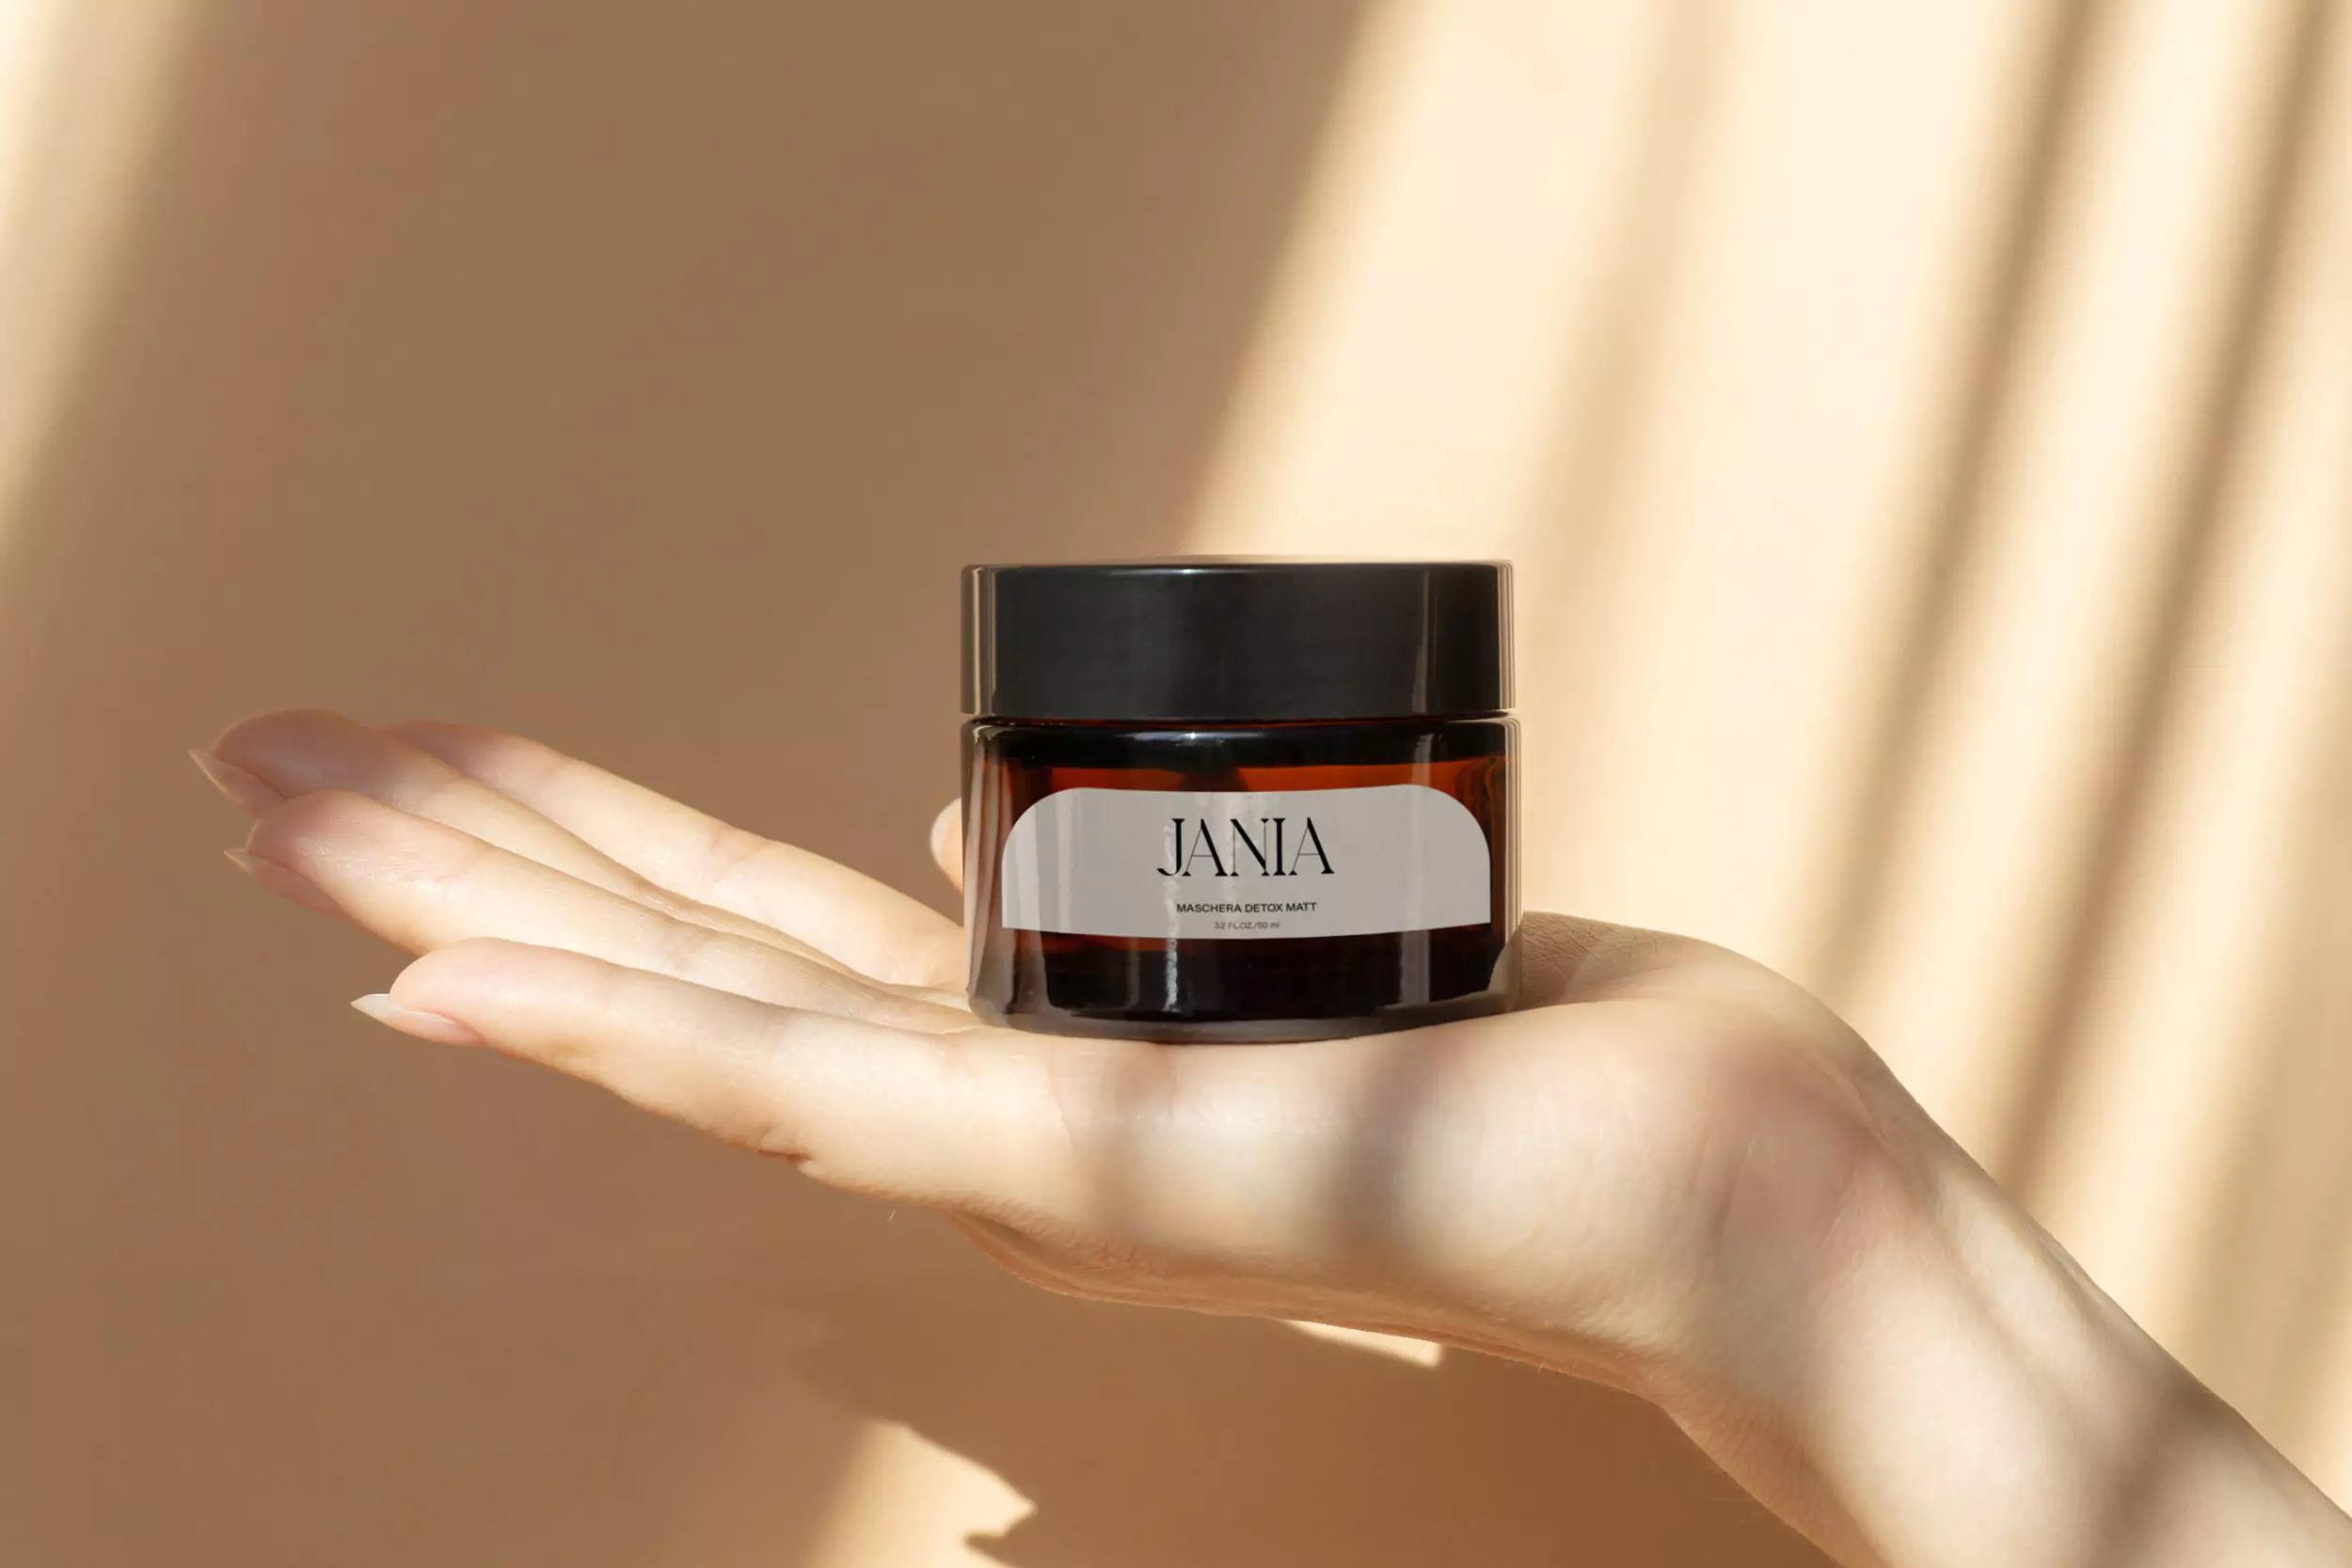 Brand Identity for Jania - Amber Jar Packaging Design